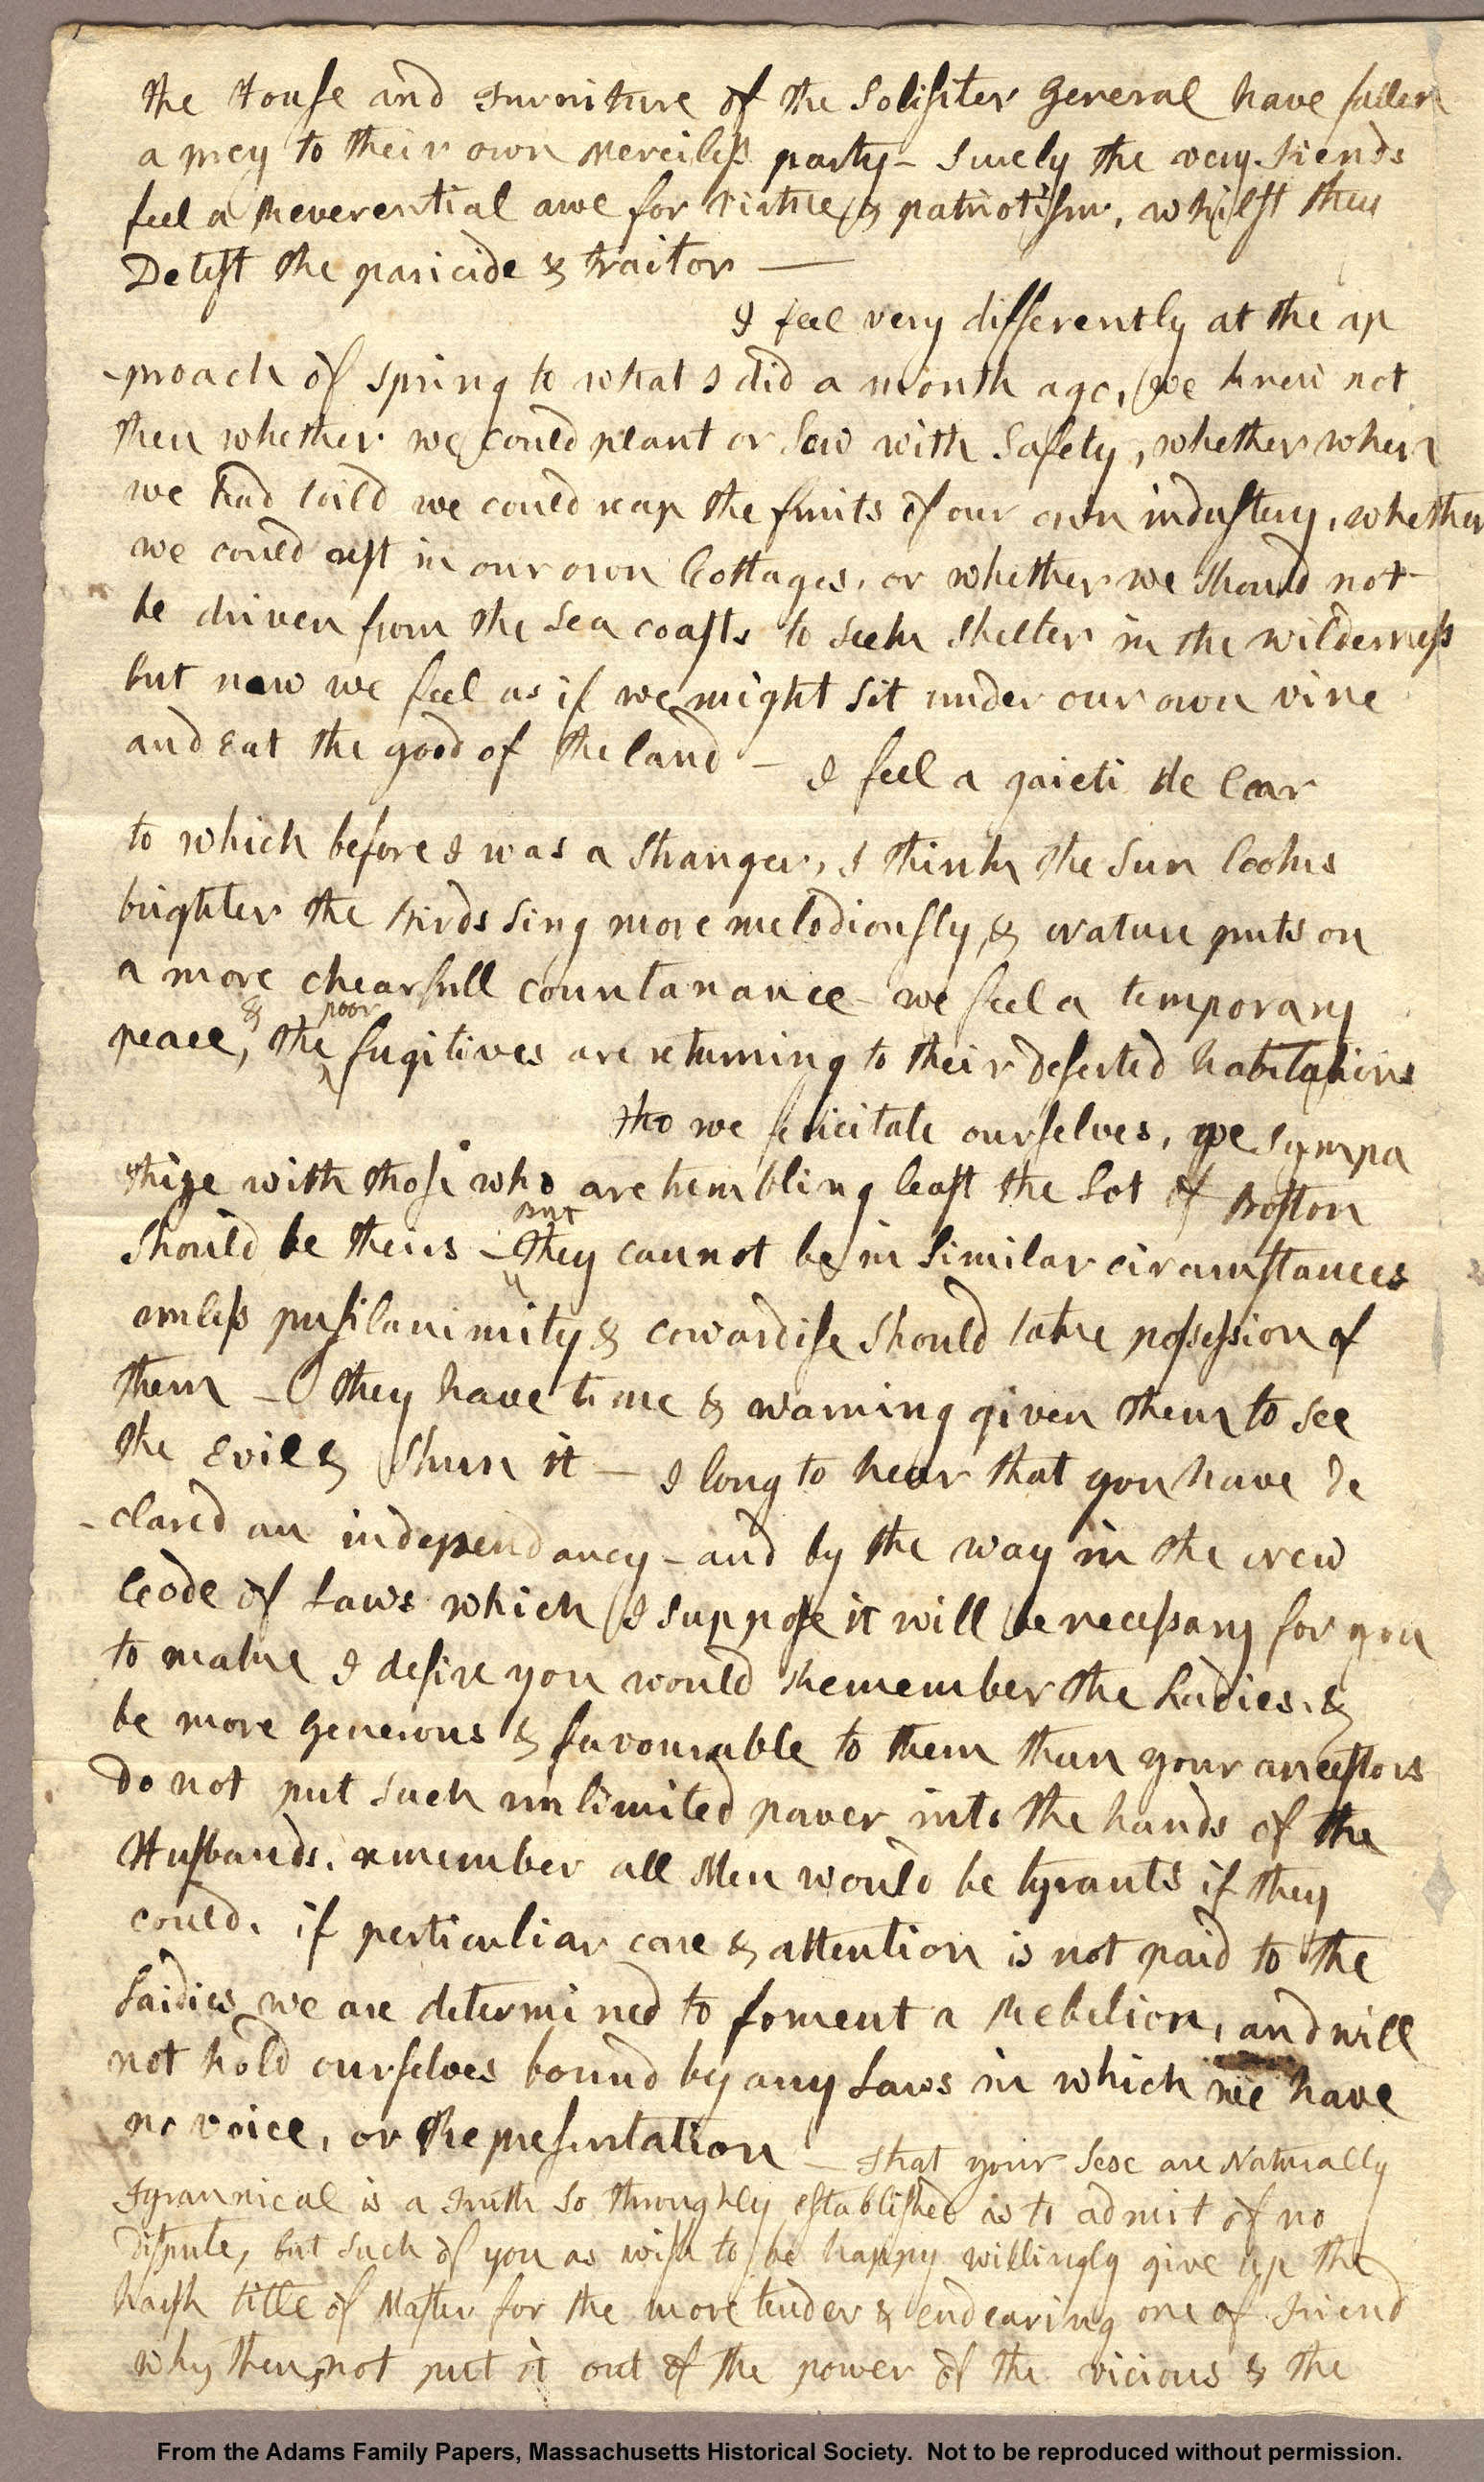 Letter from Abigail Adams to John Adams, 31 March 1776. “I desire you would Remember the Ladies, and be more generous and favourable to them than your ancestors,” Abigail Adams famously wrote to her husband as he served in the Continental Congress. Image courtesy of the Massachusetts Historical Society.